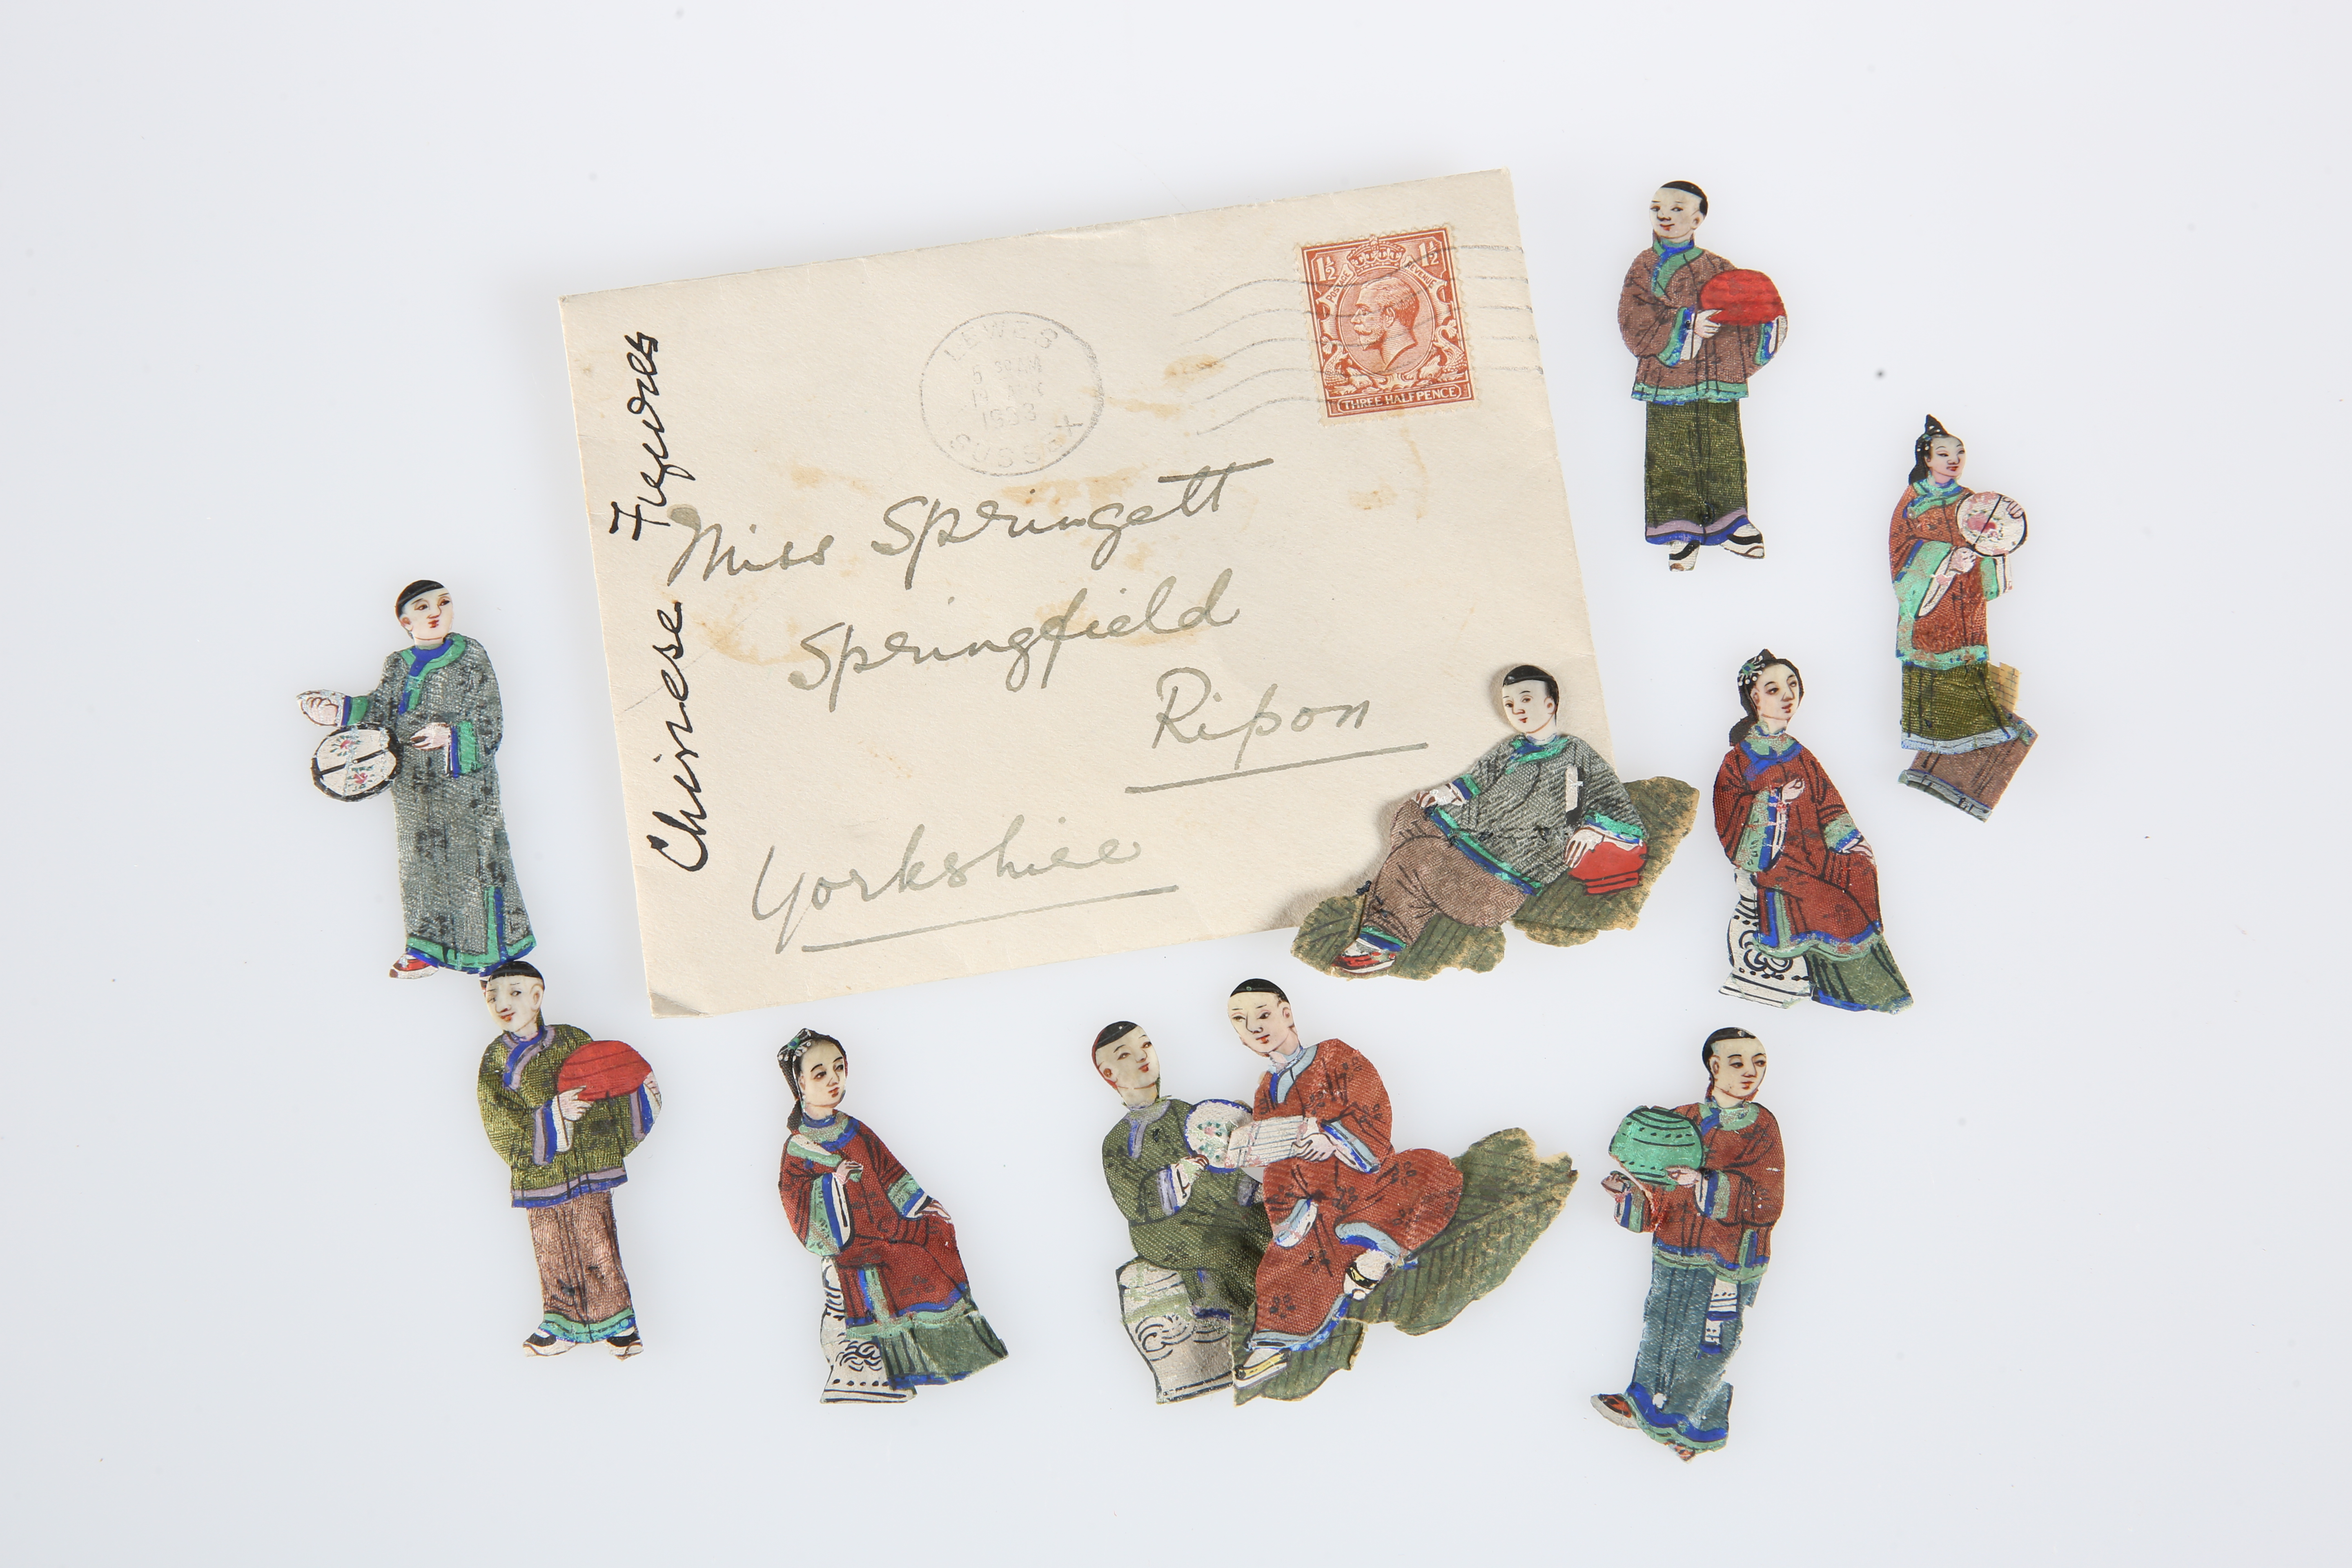 A COLLECTION OF CHINESE PAINTED SILK PAPER FIGURES, LATE 19TH/EARLY 20TH CENTURY